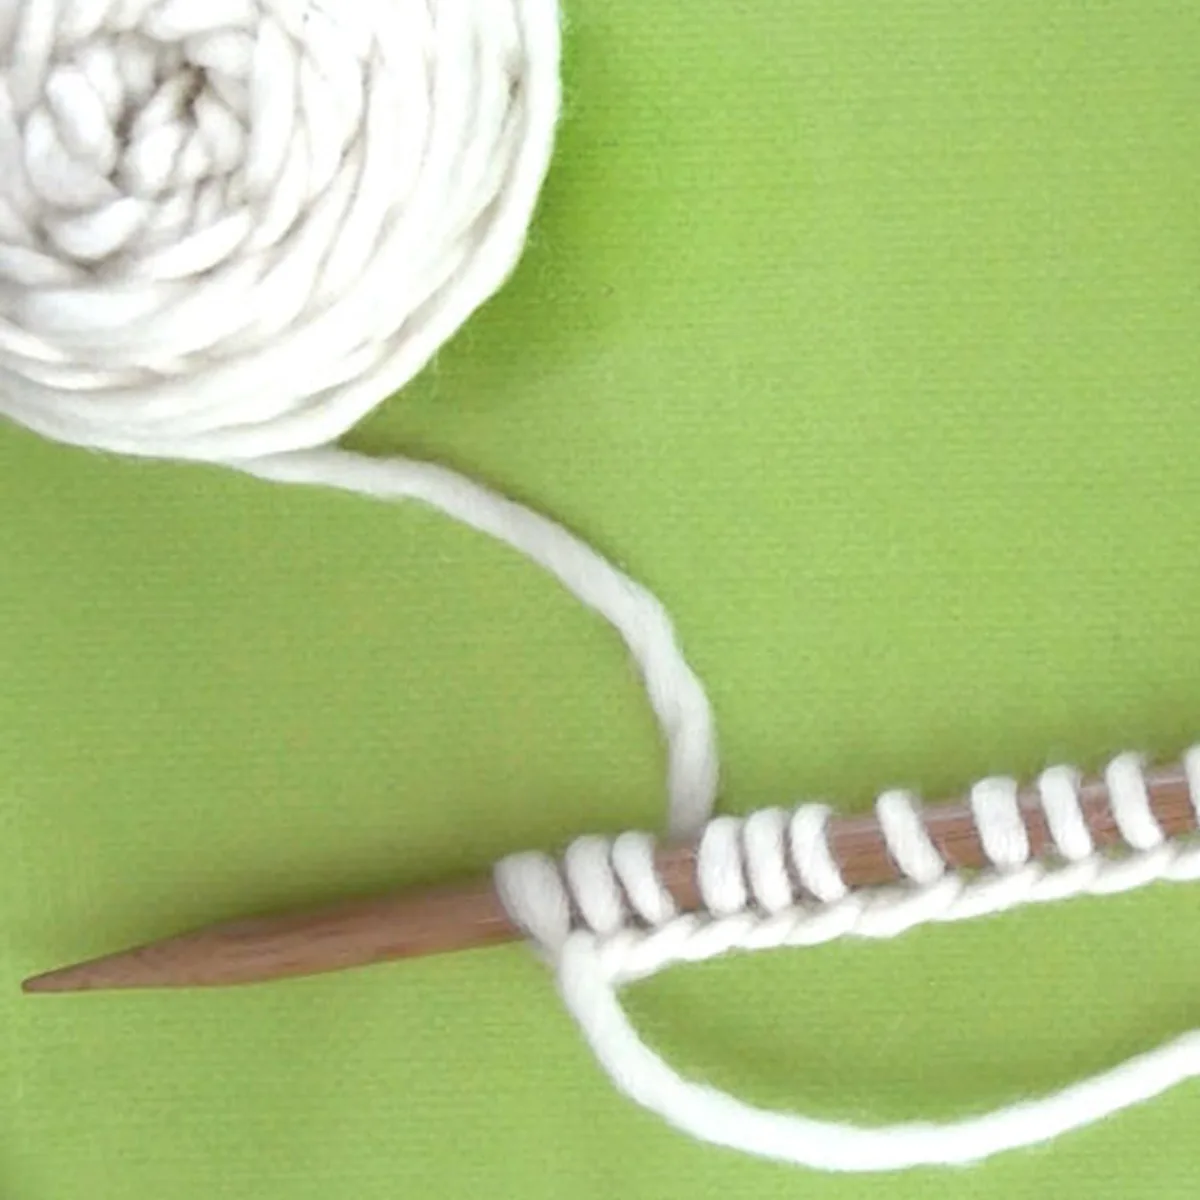 Knitting Stitches Cast On Knitting Needle with white color yarn.